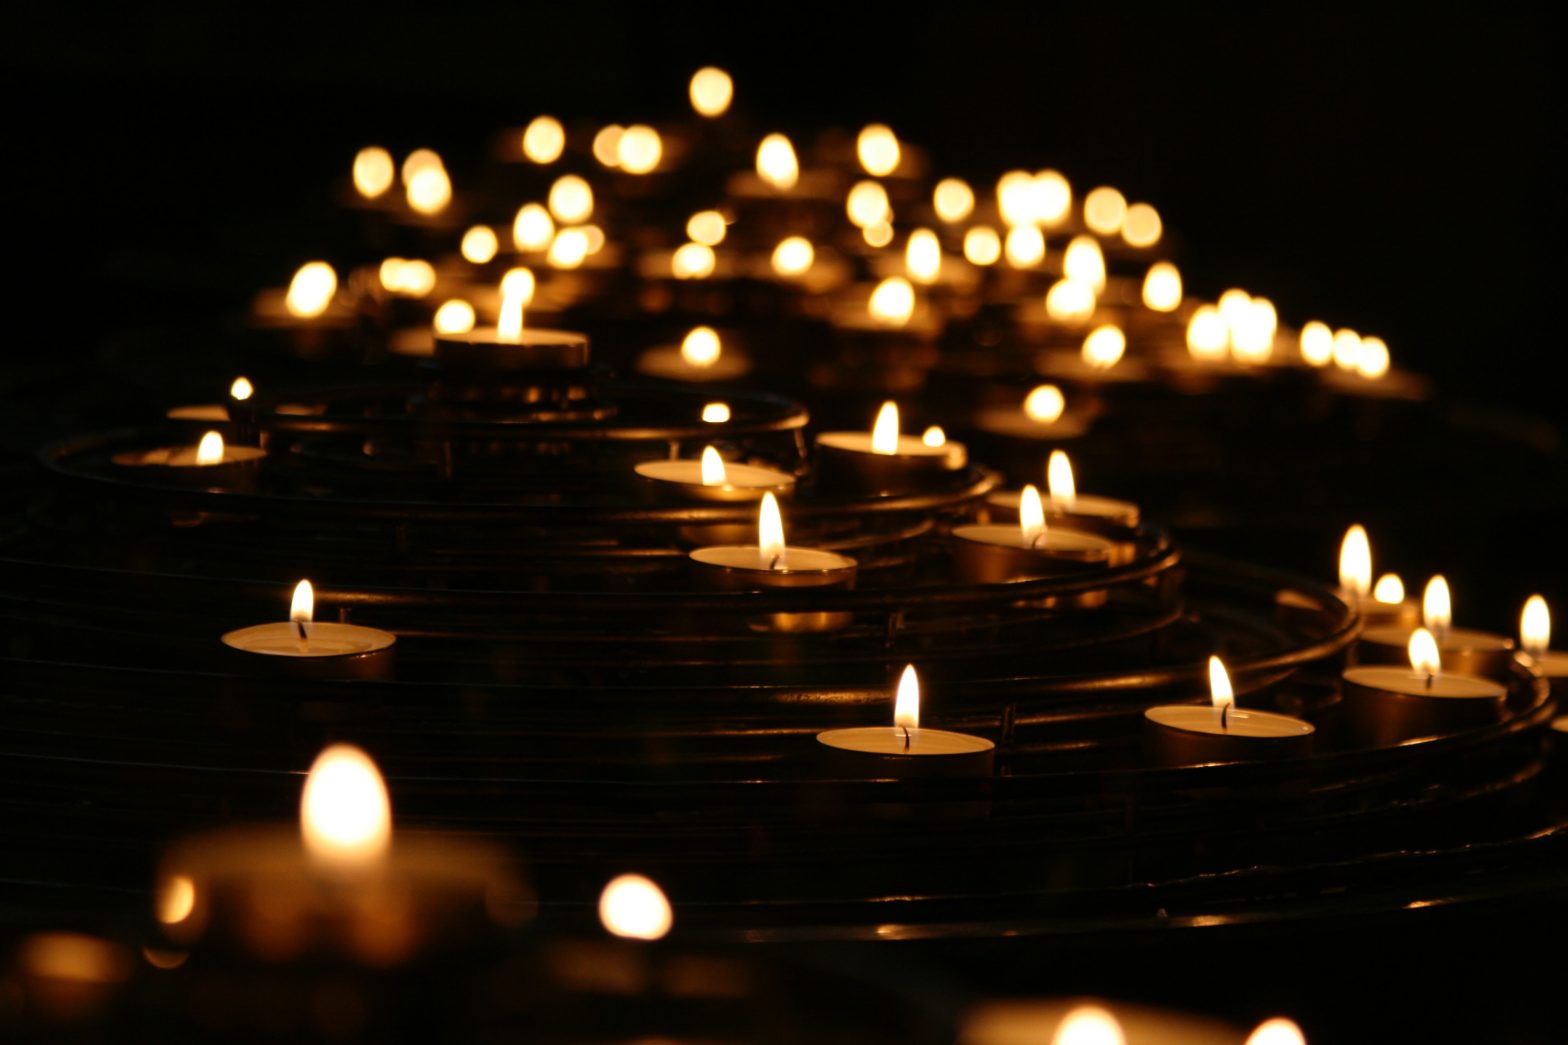 Many lit tea light candles in a dark room